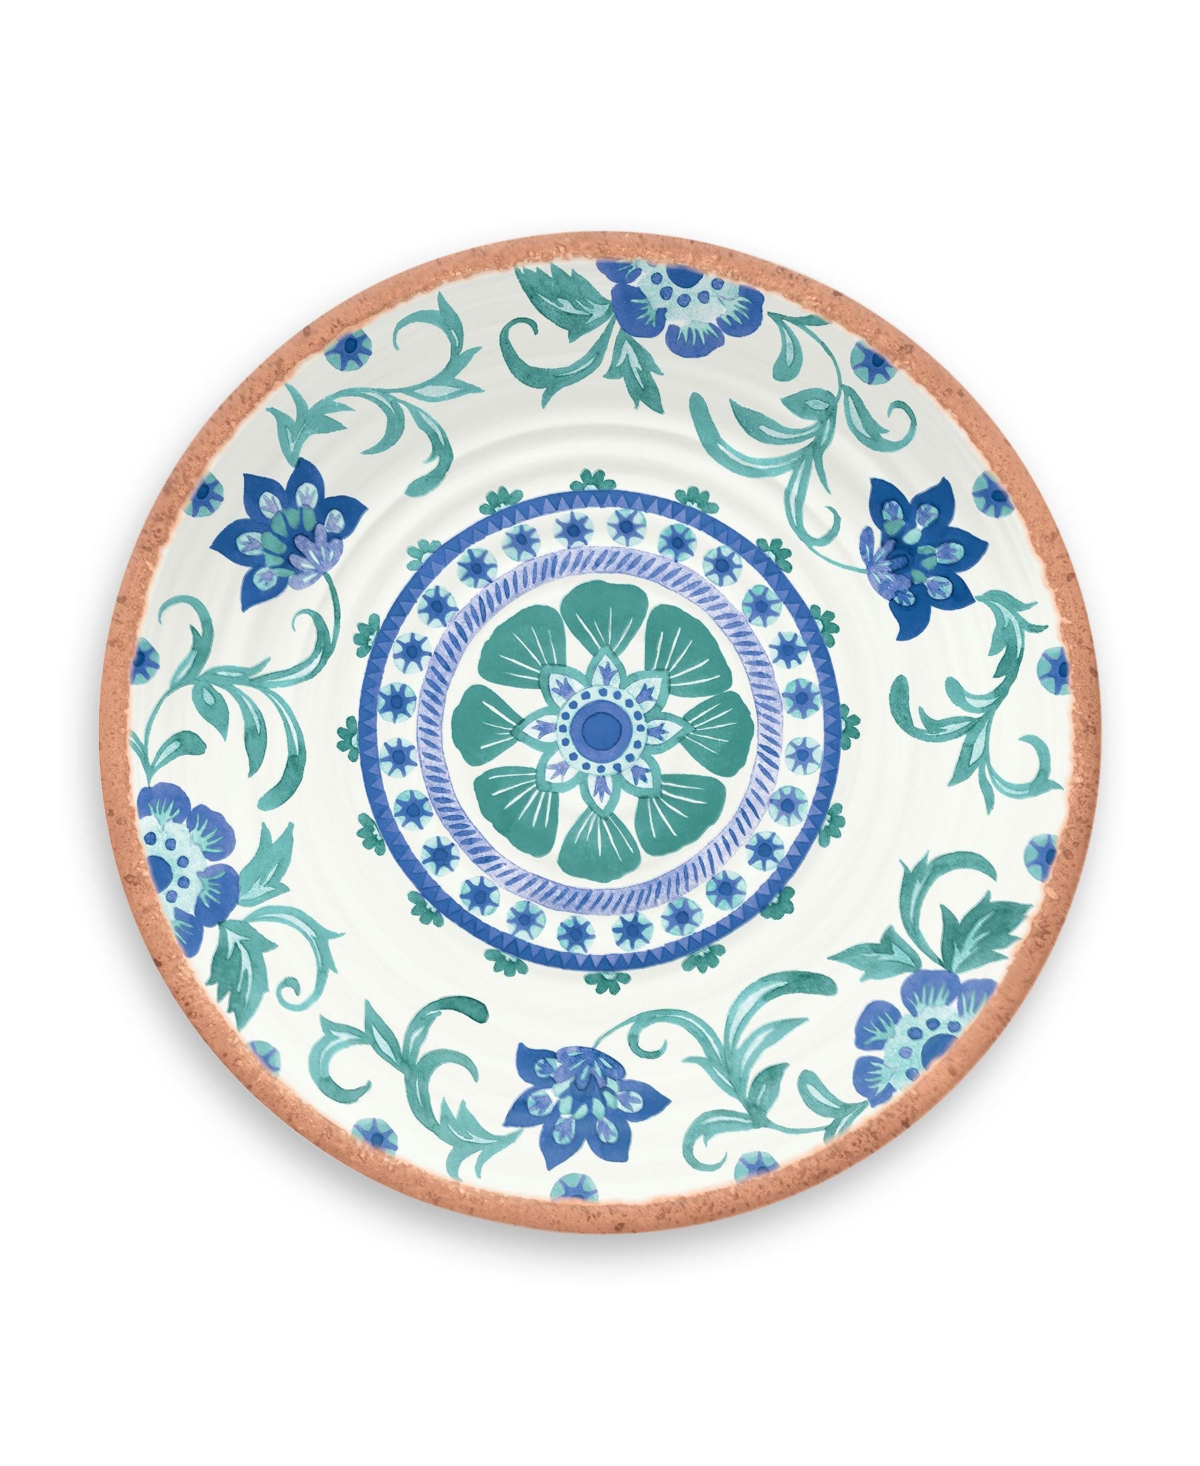 Rio Turquoise Floral Salad Plate, 8.5",Melamine,Set Of 6 - Blue, Green , White